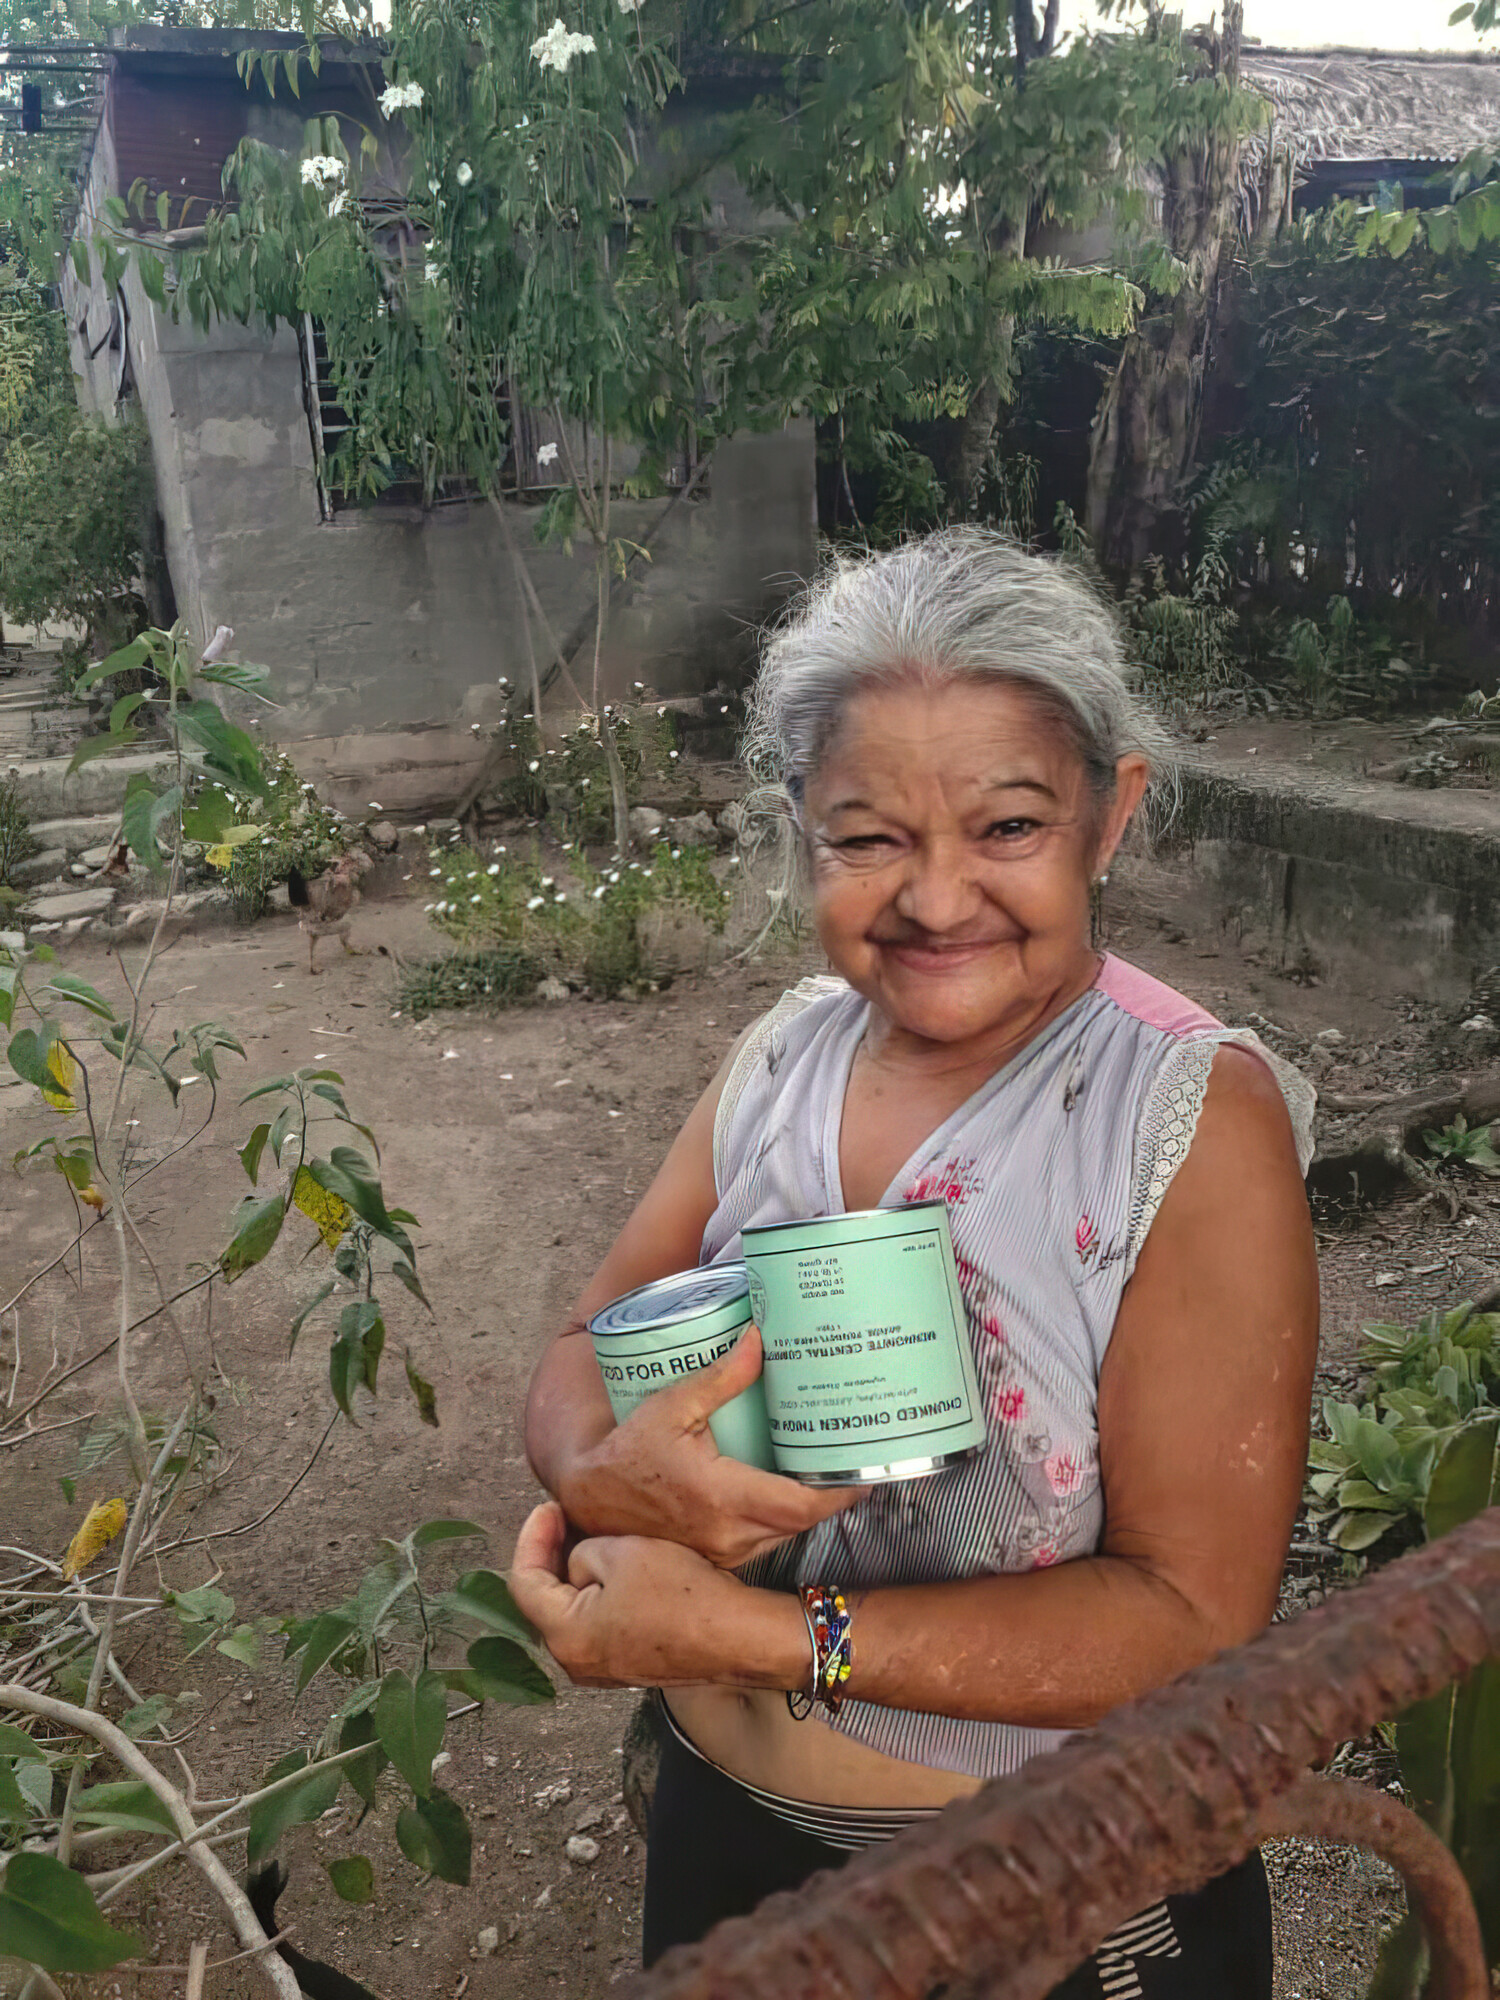 An older Cuban woman stands in a yard and holds two cans of meat with green labels.